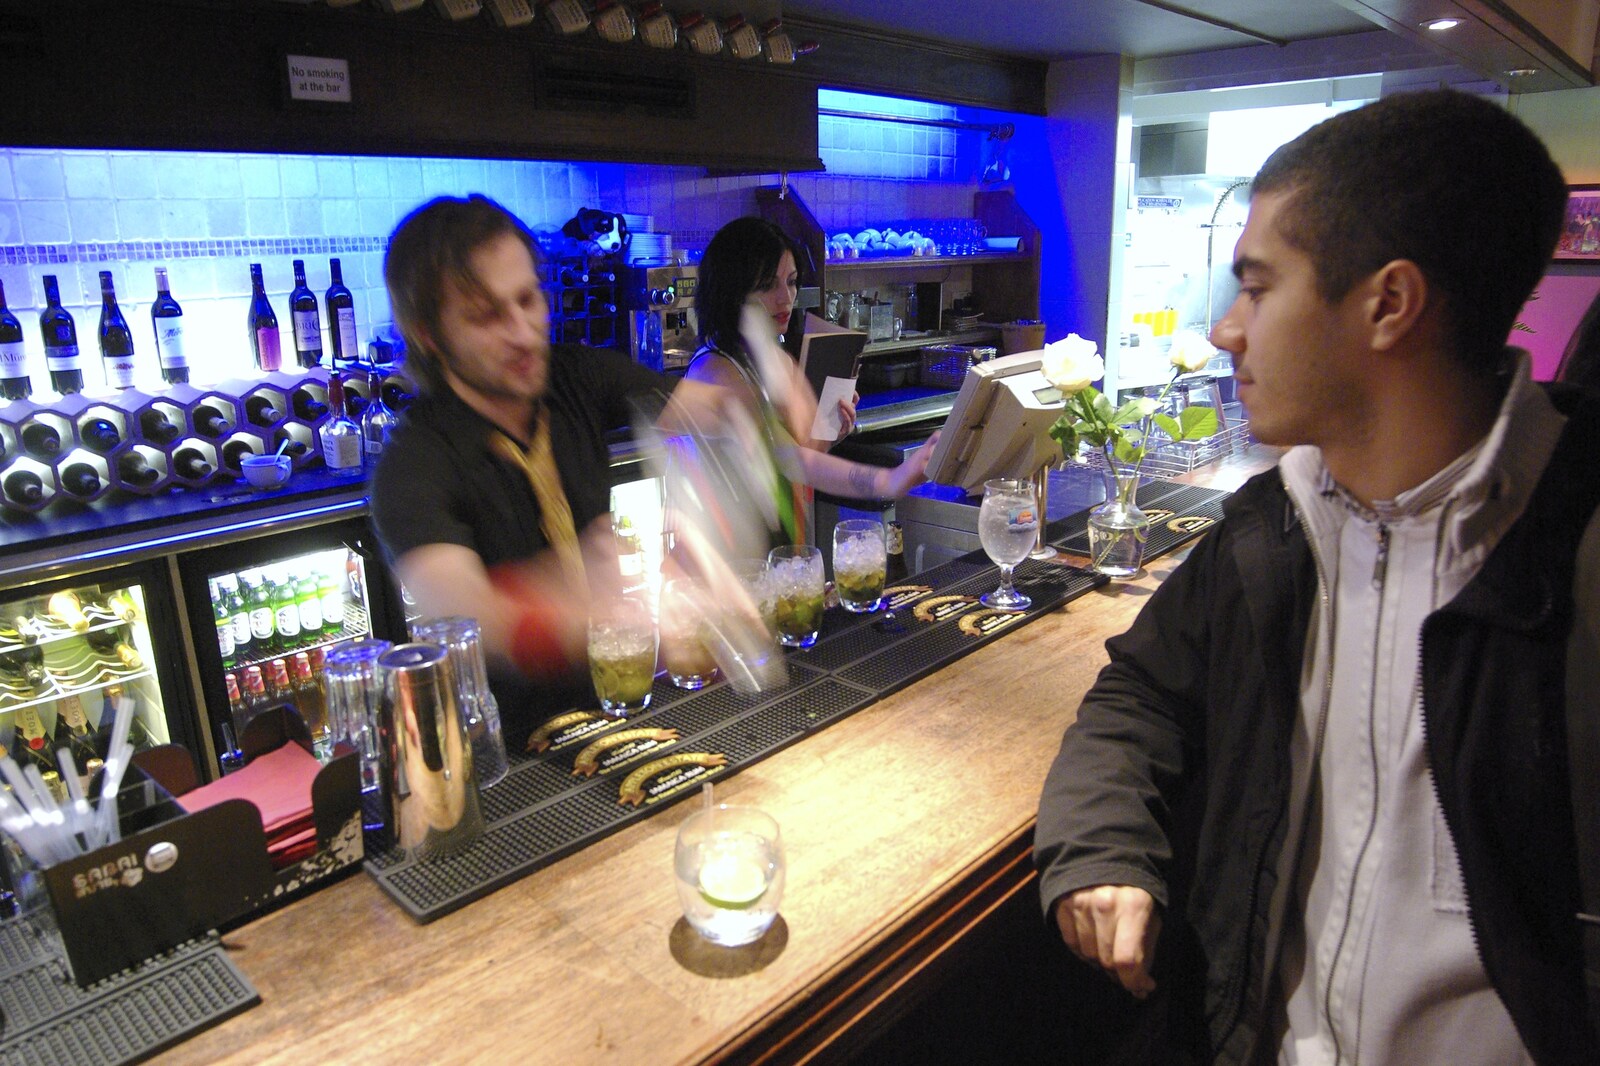 The barman is a blur as Marc waits for the drinks from Taptu on the Razz at La Raza, Rose Crescent, Cambridge - 22nd February 2007